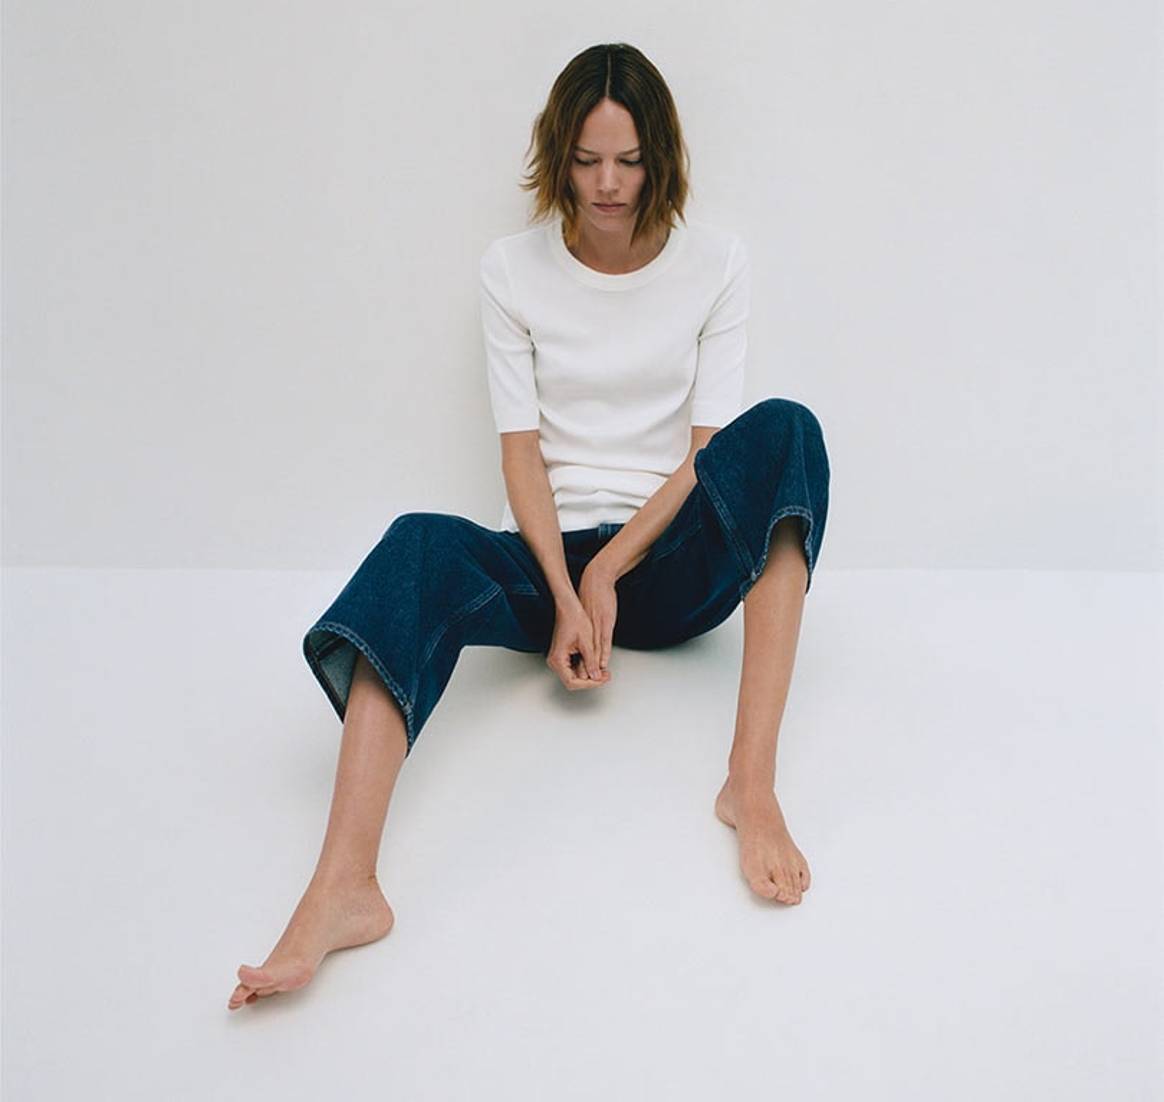 Cos launches sustainable denim collection with pop-up